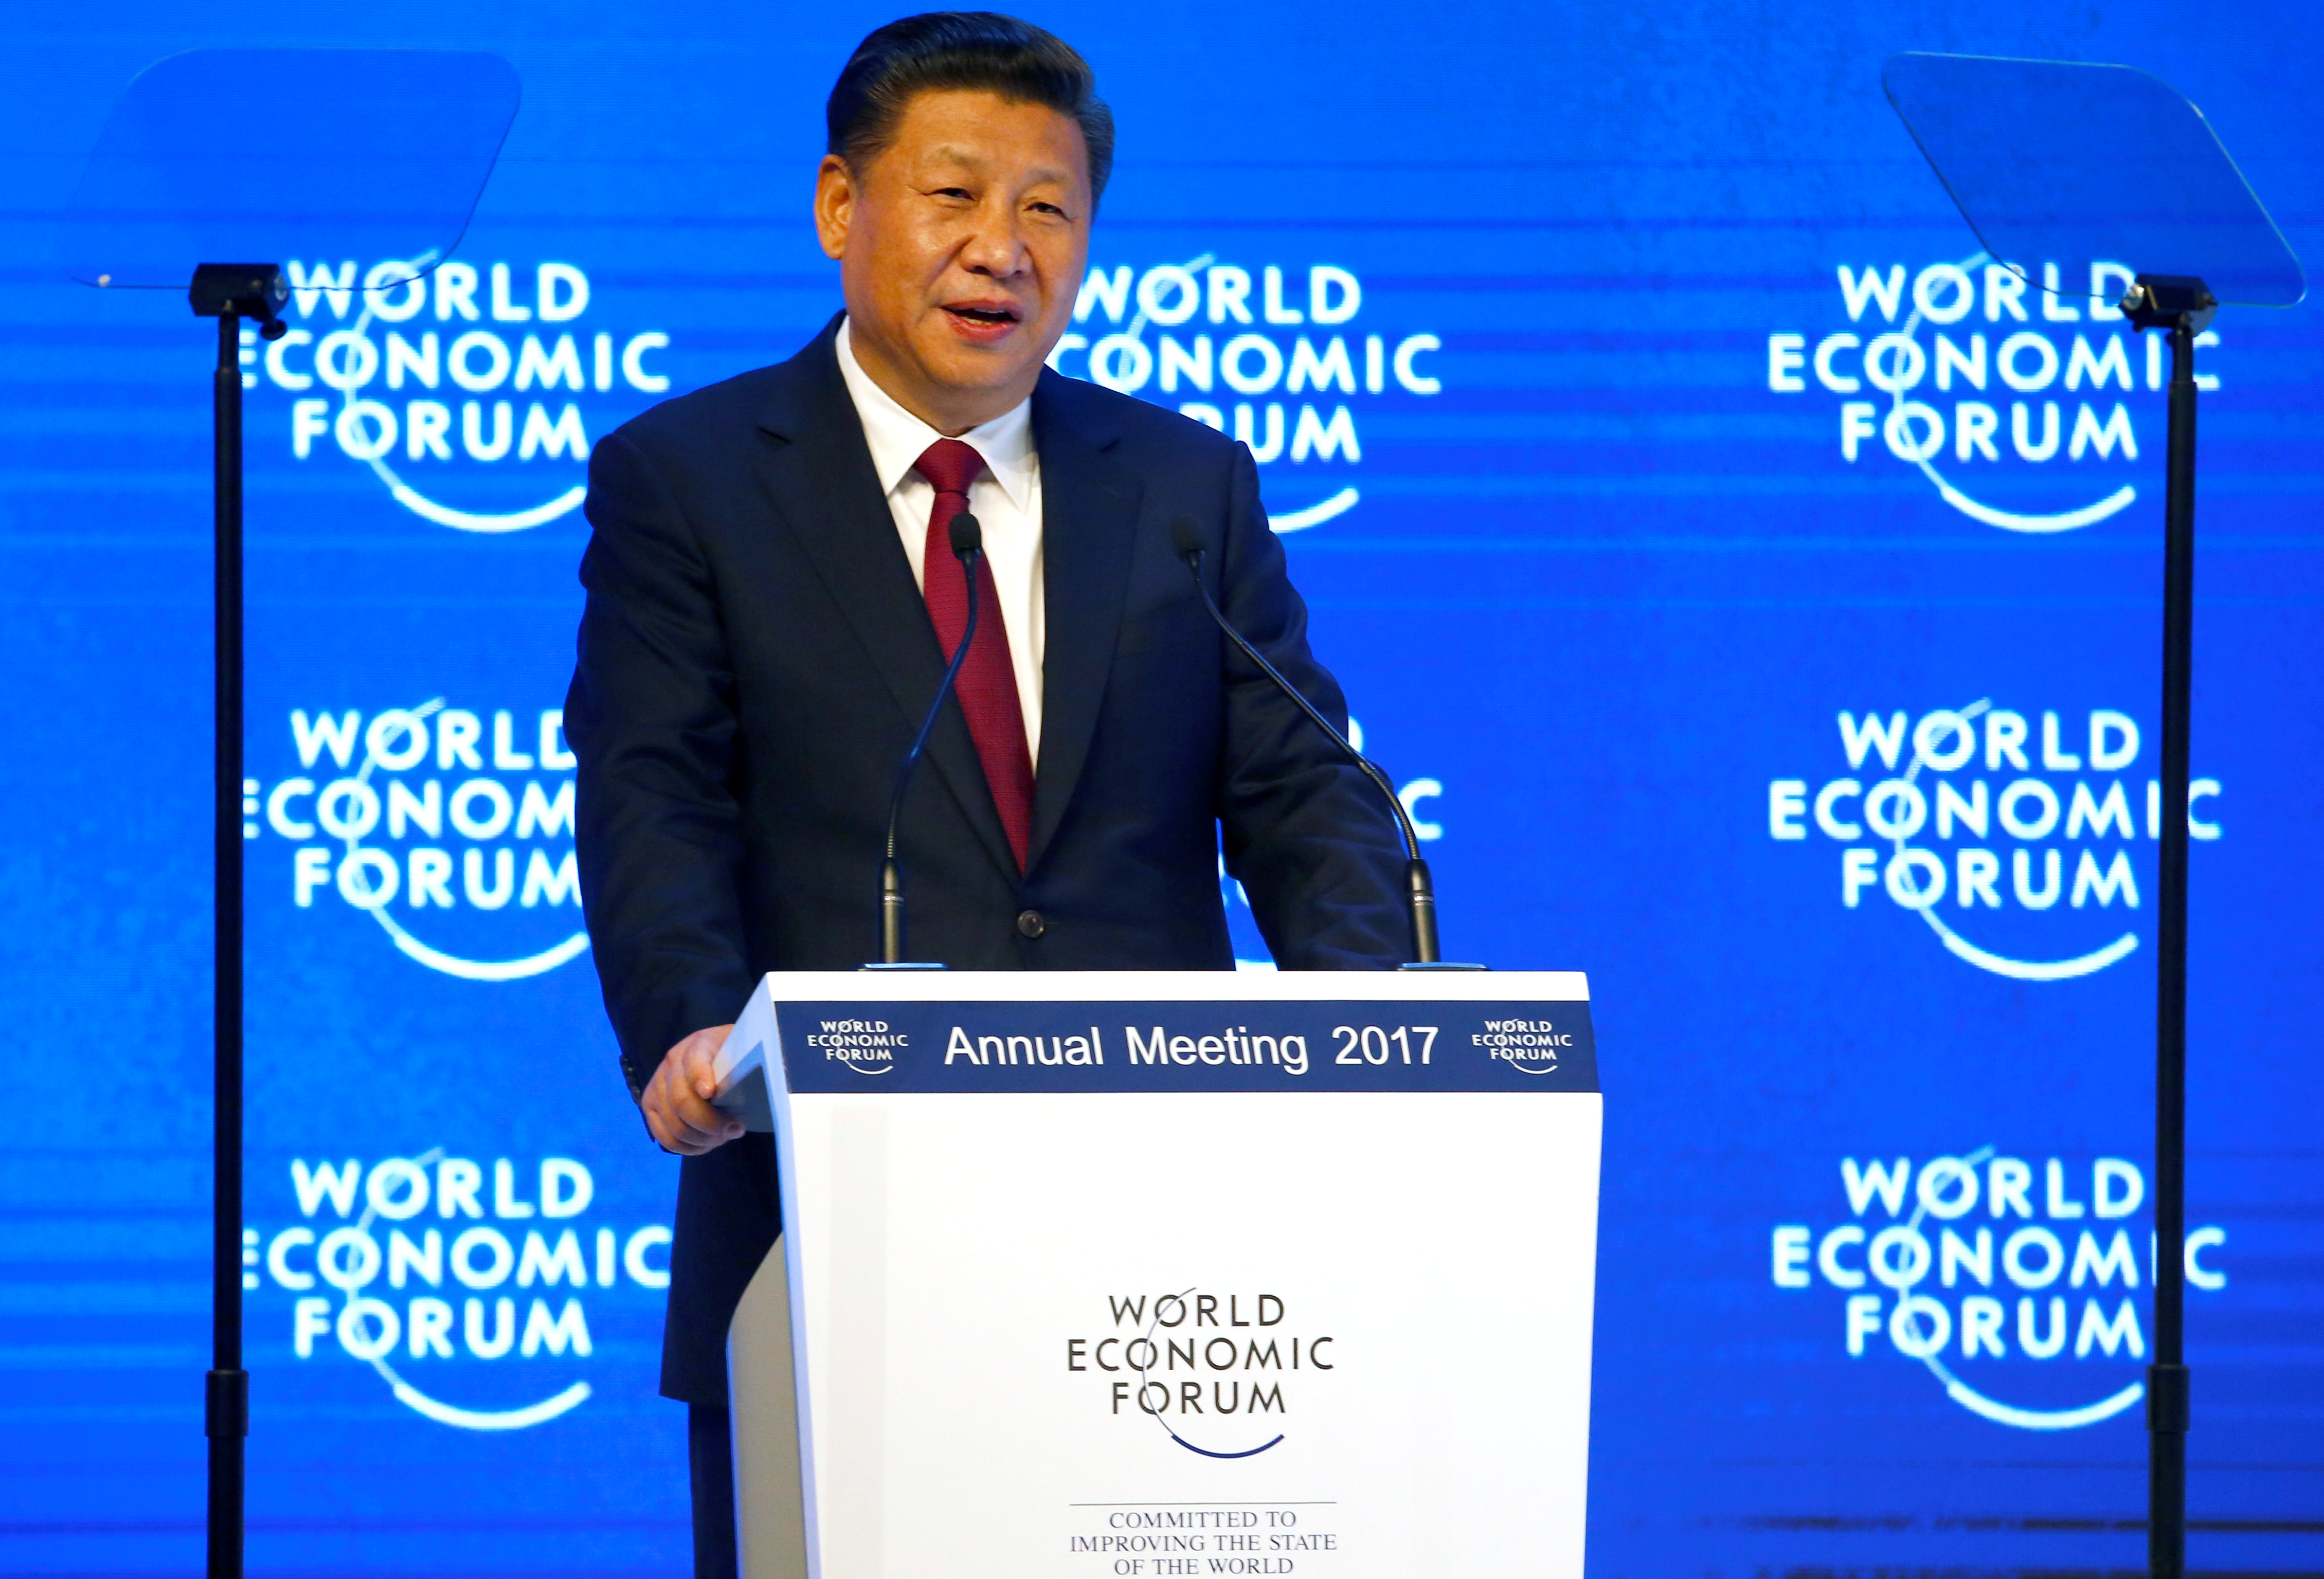 Chinese President Xi Jinping attends the World Economic Forum (WEF) annual meeting in Davos, Switzerland January 17, 2017.   REUTERS/Ruben Sprich TPX IMAGES OF THE DAY/File Photo